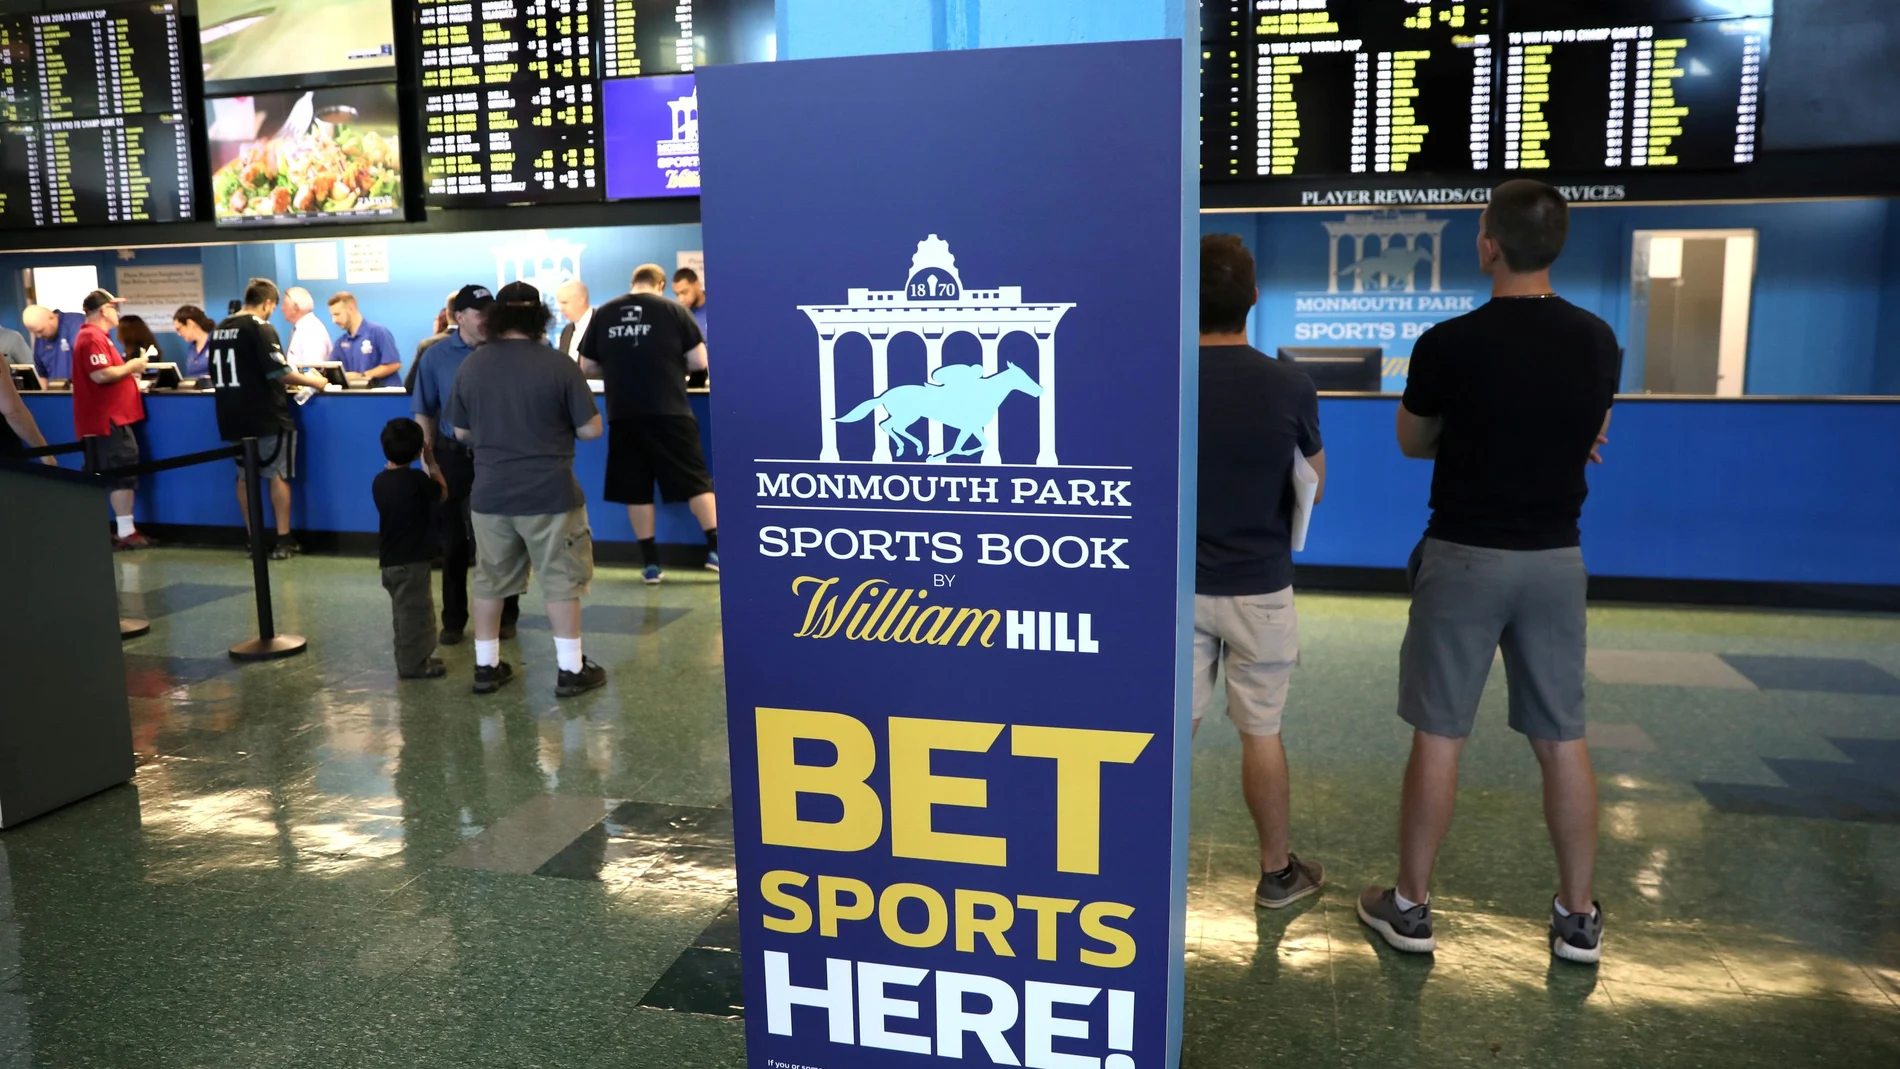 FILE PHOTO: Gamblers place bets on sports at Monmouth Park Sports Book by William Hill, shortly after the opening of the first day of legal betting on sports in Oceanport